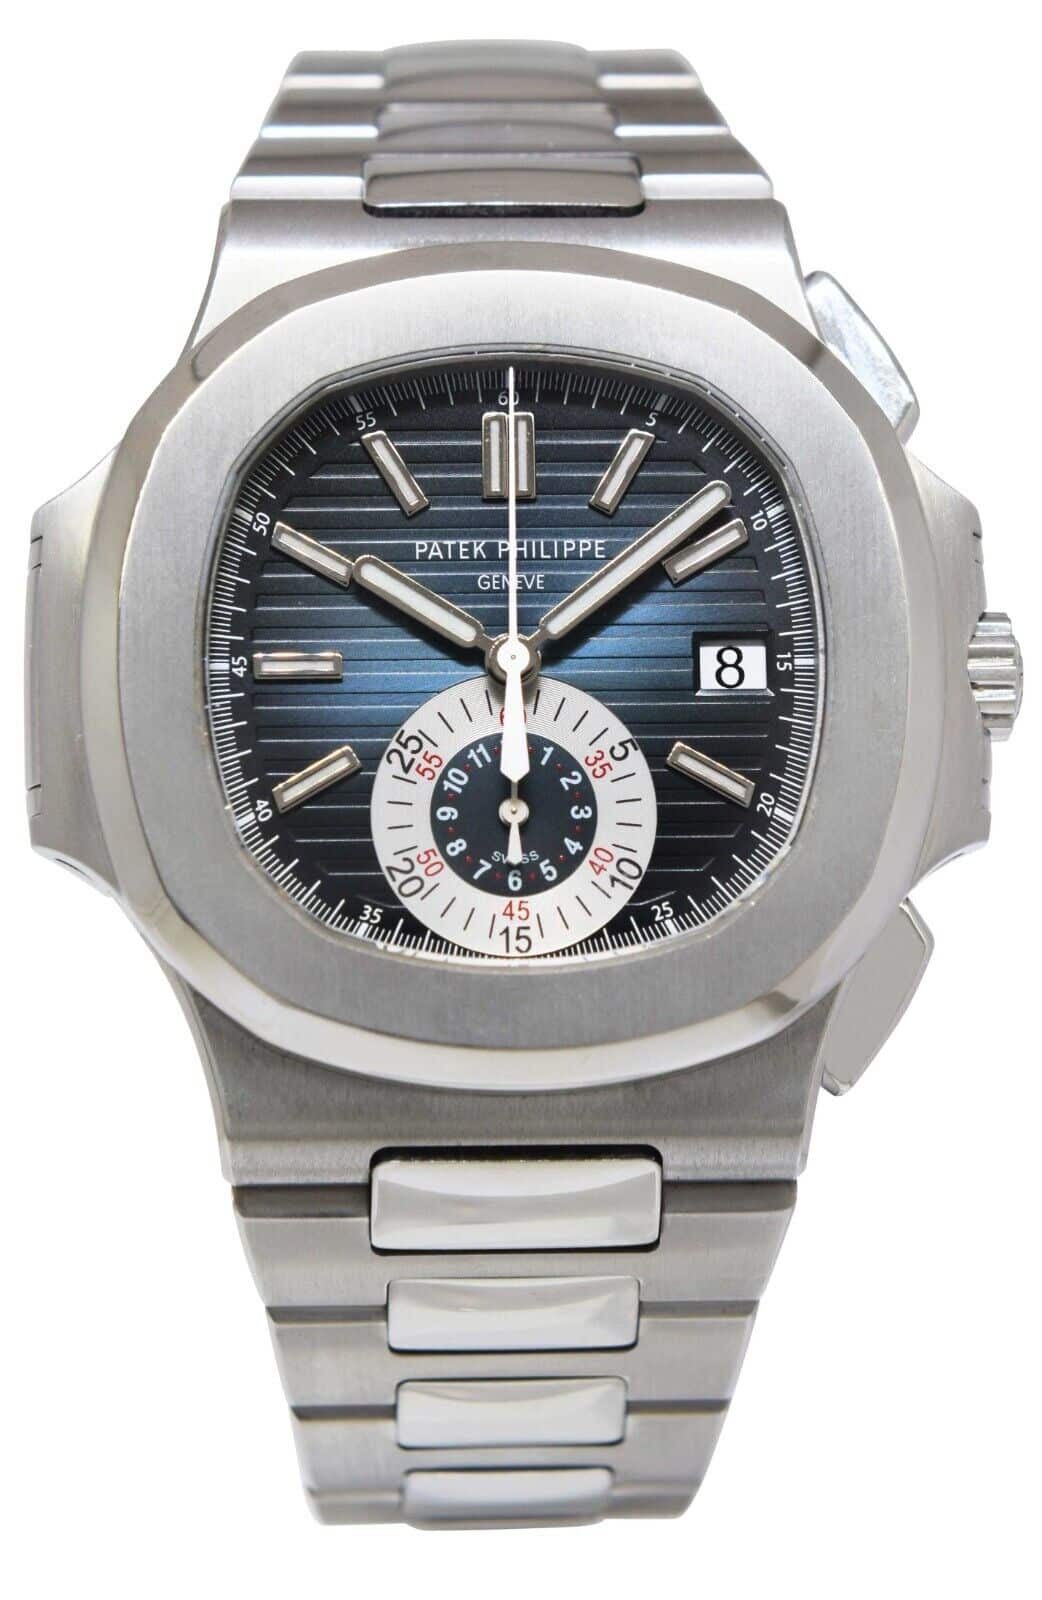 Patek Philippe Nautilus 5990/1A-001 Tiffany & Co. Dial Travel Time  Chronograph 40.5mm Black Dial Stainless Steel Men's Watch